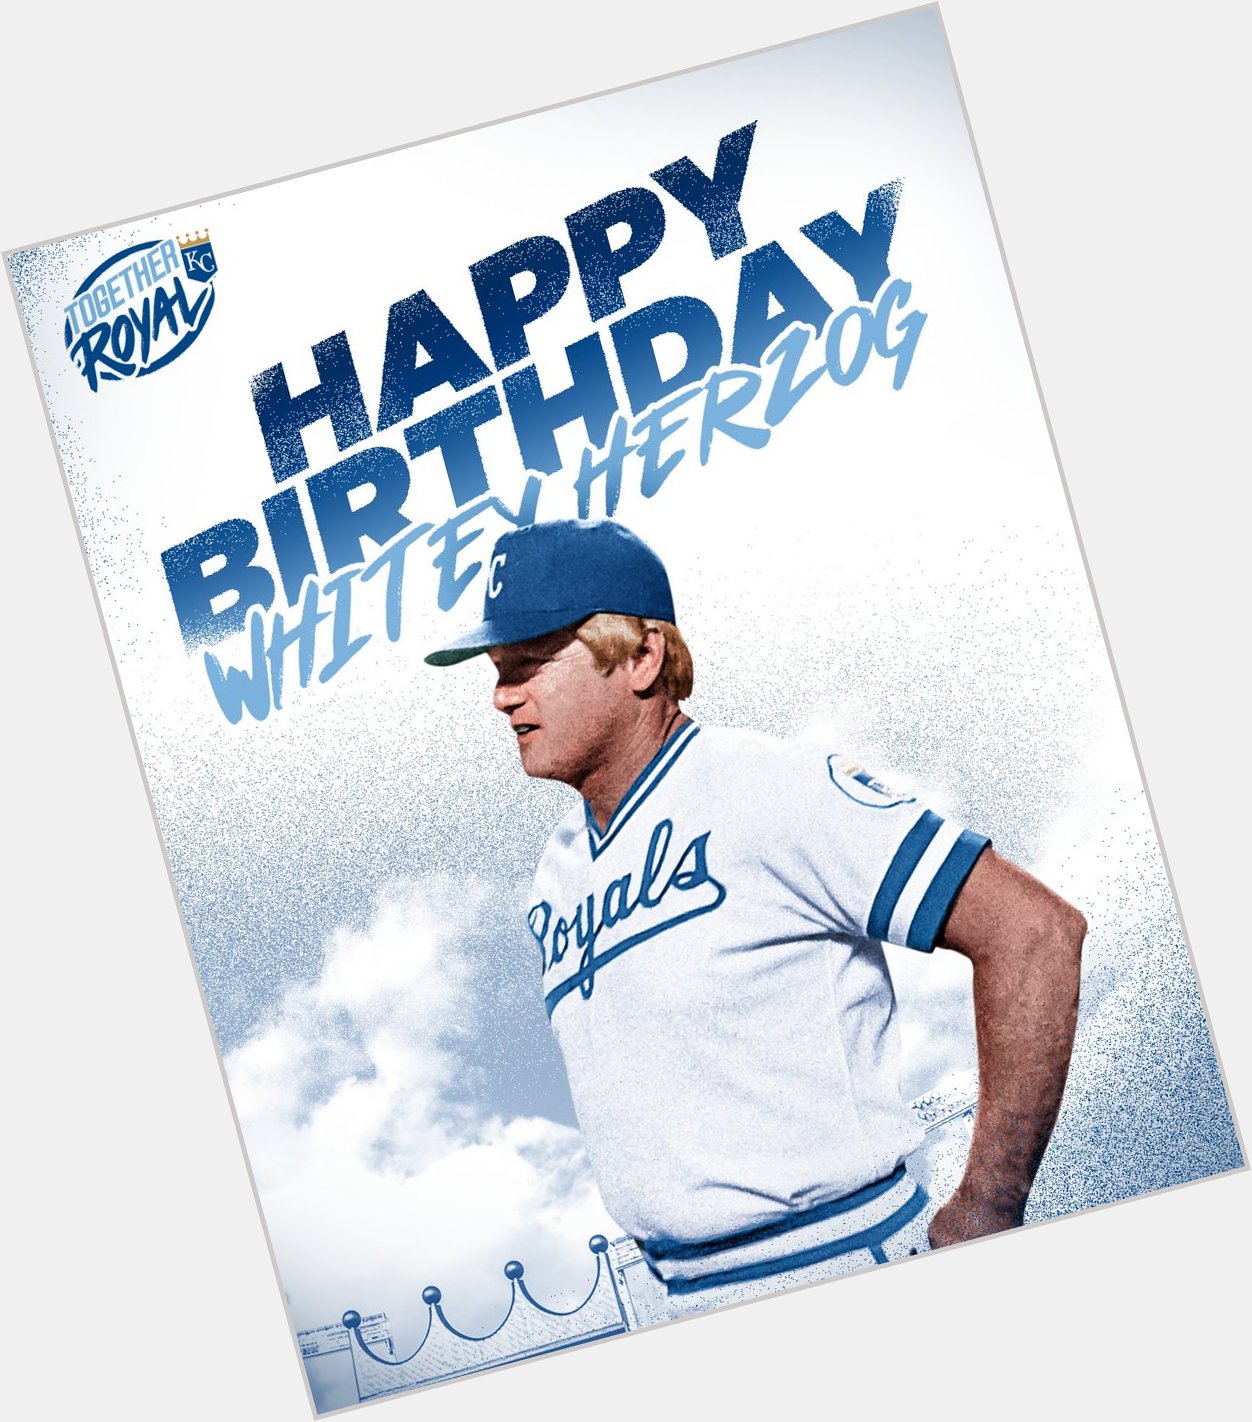 Happy birthday to former Royals manager and Hall of Famer, Whitey Herzog! 